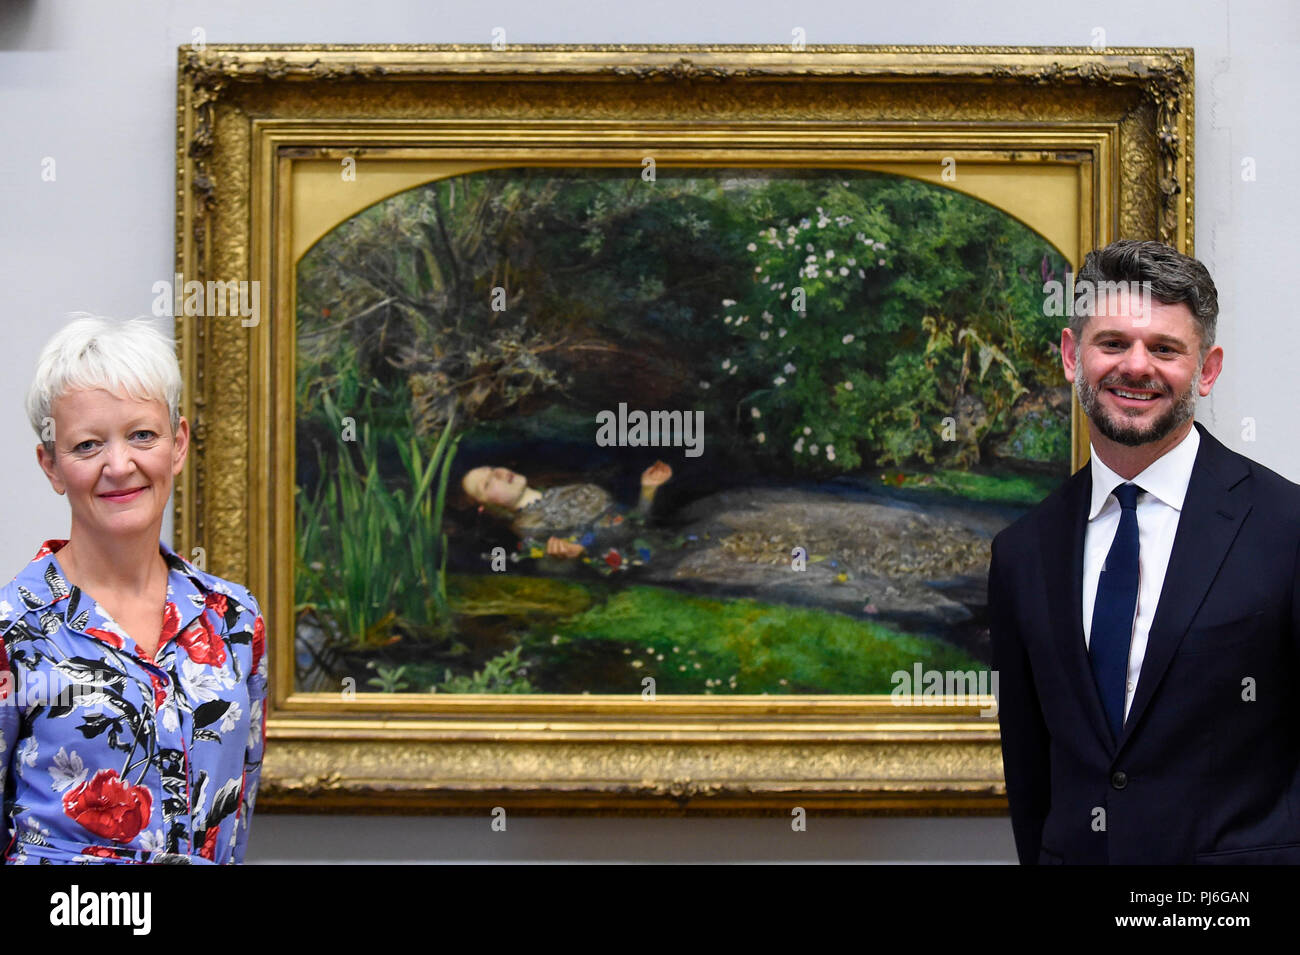 London, UK.  5 September 2018.  Maria Balshaw, Director of Tate, and Nick Mitzevich, Director of the National Gallery of Australia, pose with 'Ophelia', 1851-52, by John Everett Millais, at Tate Britain, to mark the launch of a major new exhibition at the National Gallery of Australia (NGA) in December 2018.  Over forty Pre-Raphaelite works will be loaned by Tate to NGA, which have never been shown in Australia until now, including 'Ophelia', 1851-52, by John Everett Millais and 'The Lady of Shalott', 1888, by John William Waterhouse. Credit: Stephen Chung / Alamy Live News Stock Photo